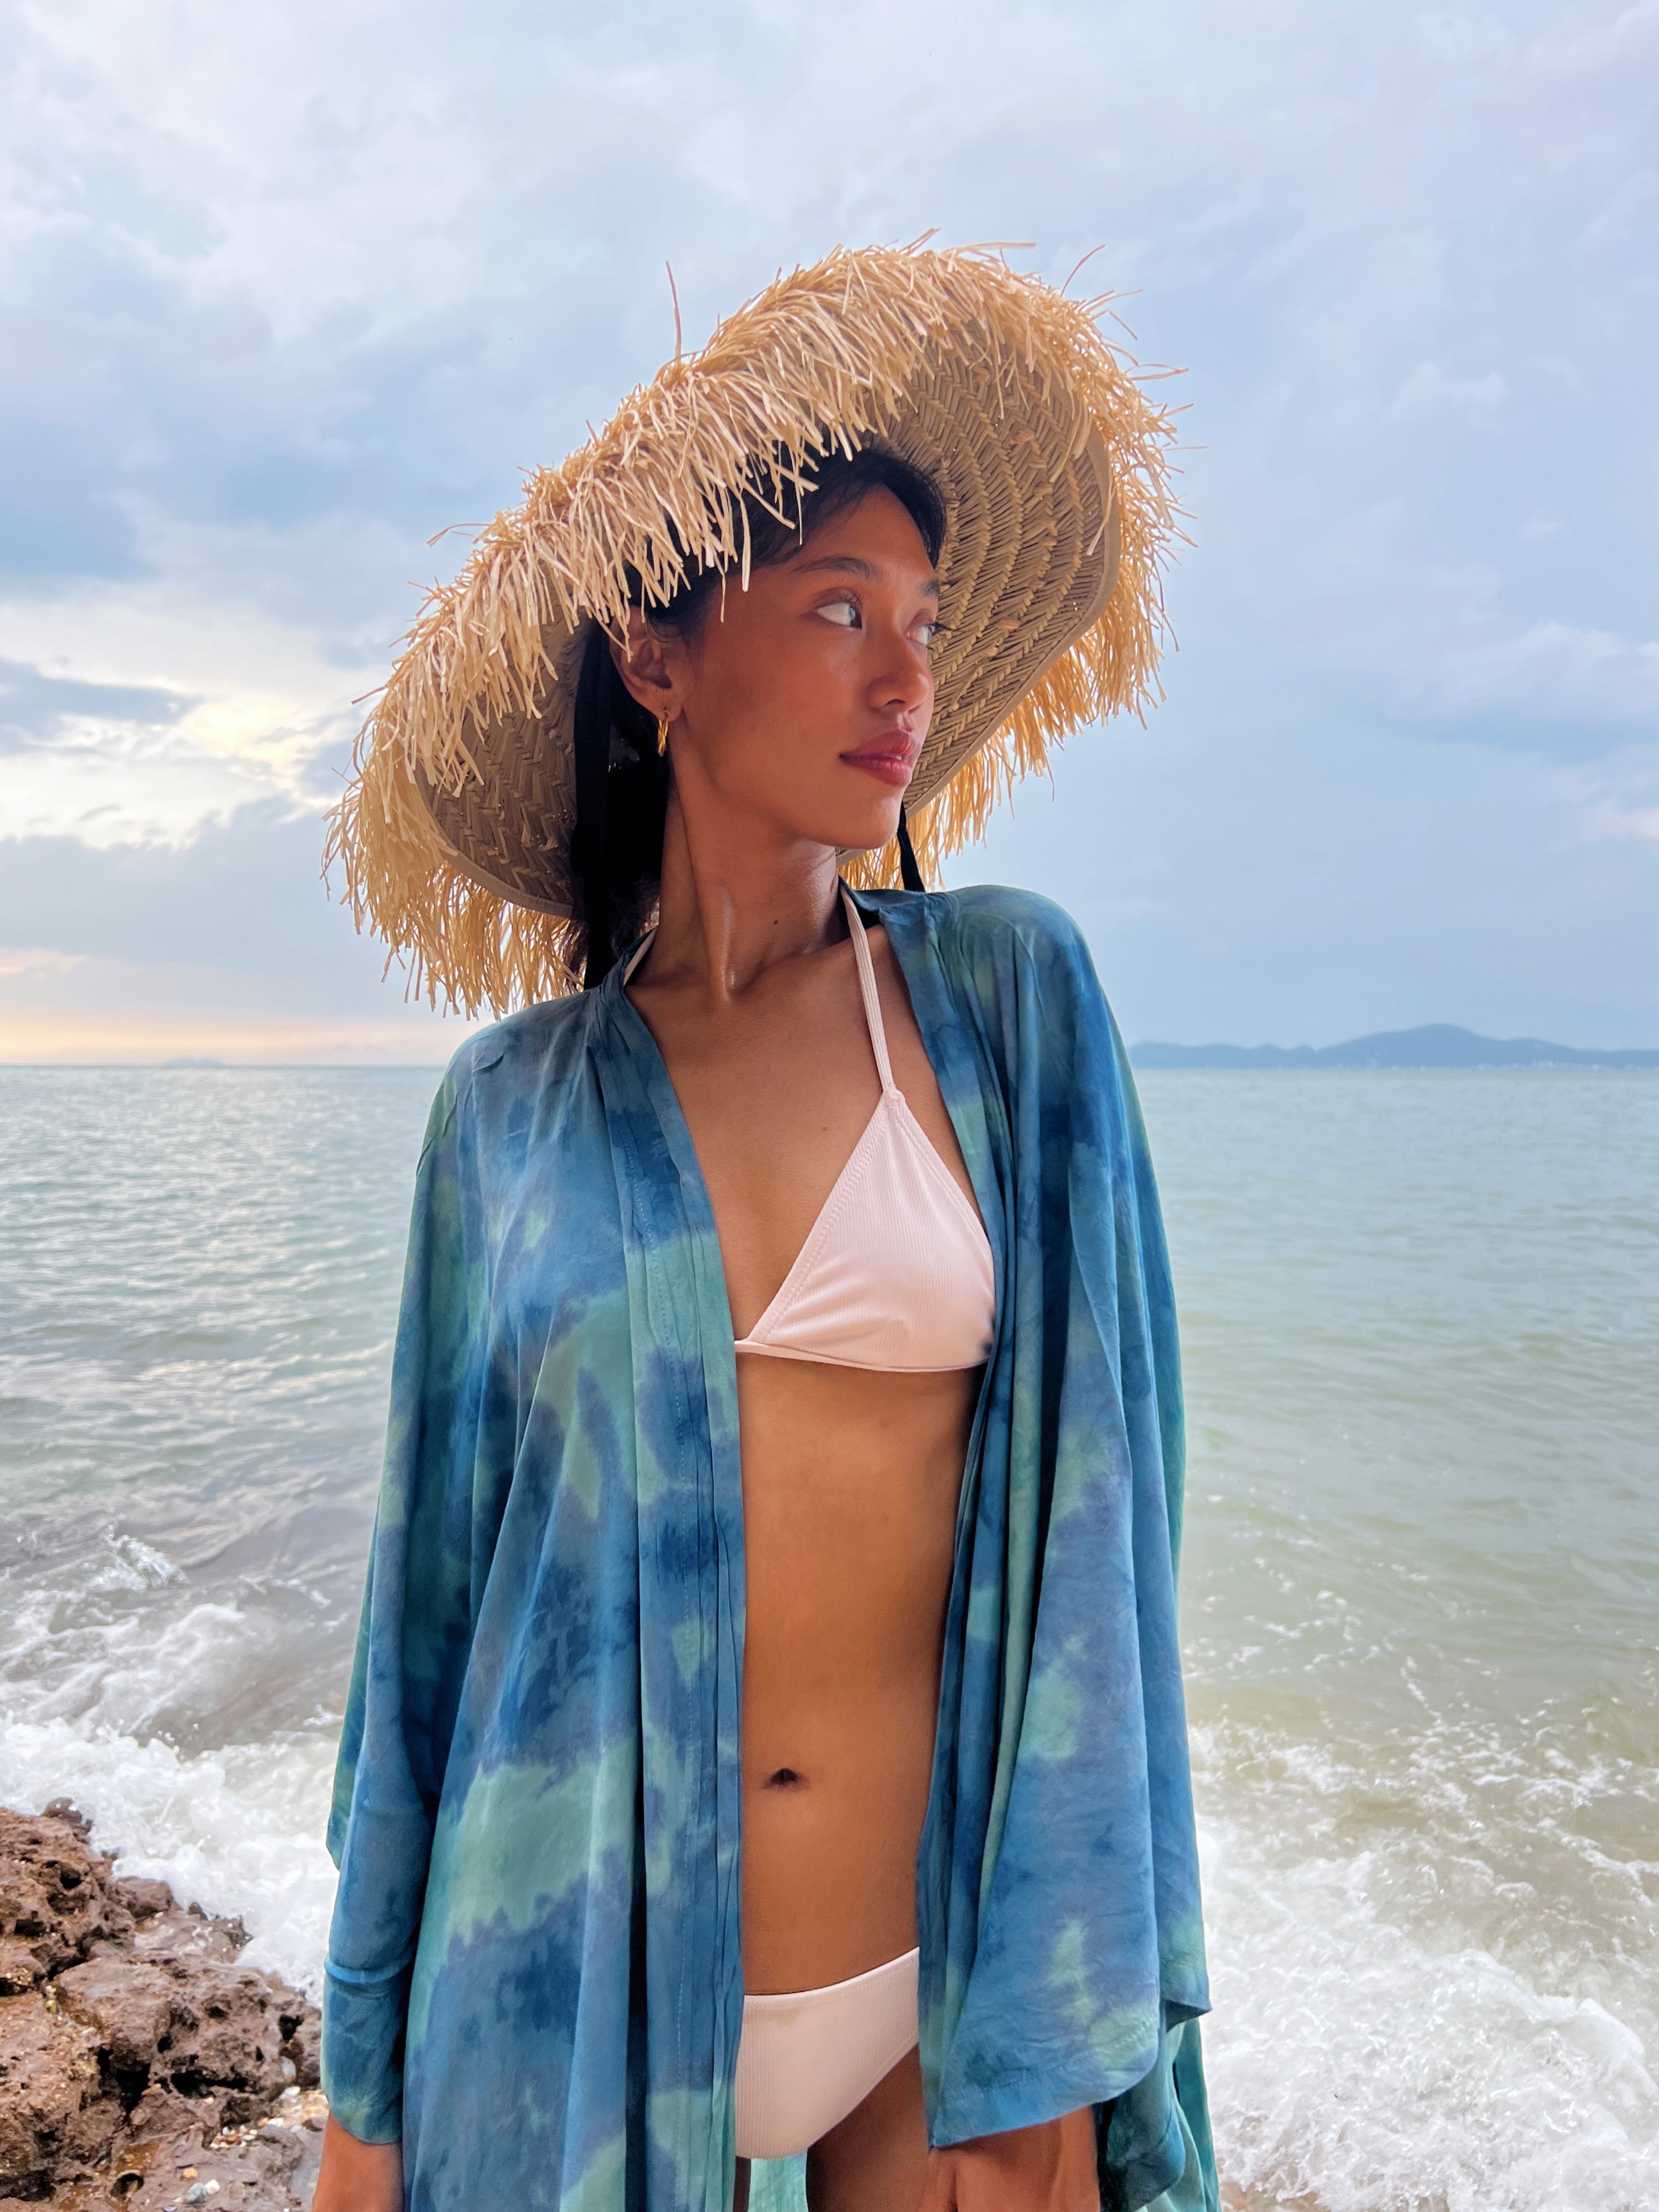 Shop Blue Tie dye kimono robe, boho beach coverup, perfect for vacation or everyday wear, this product is handmade with love by Coco de Chom.